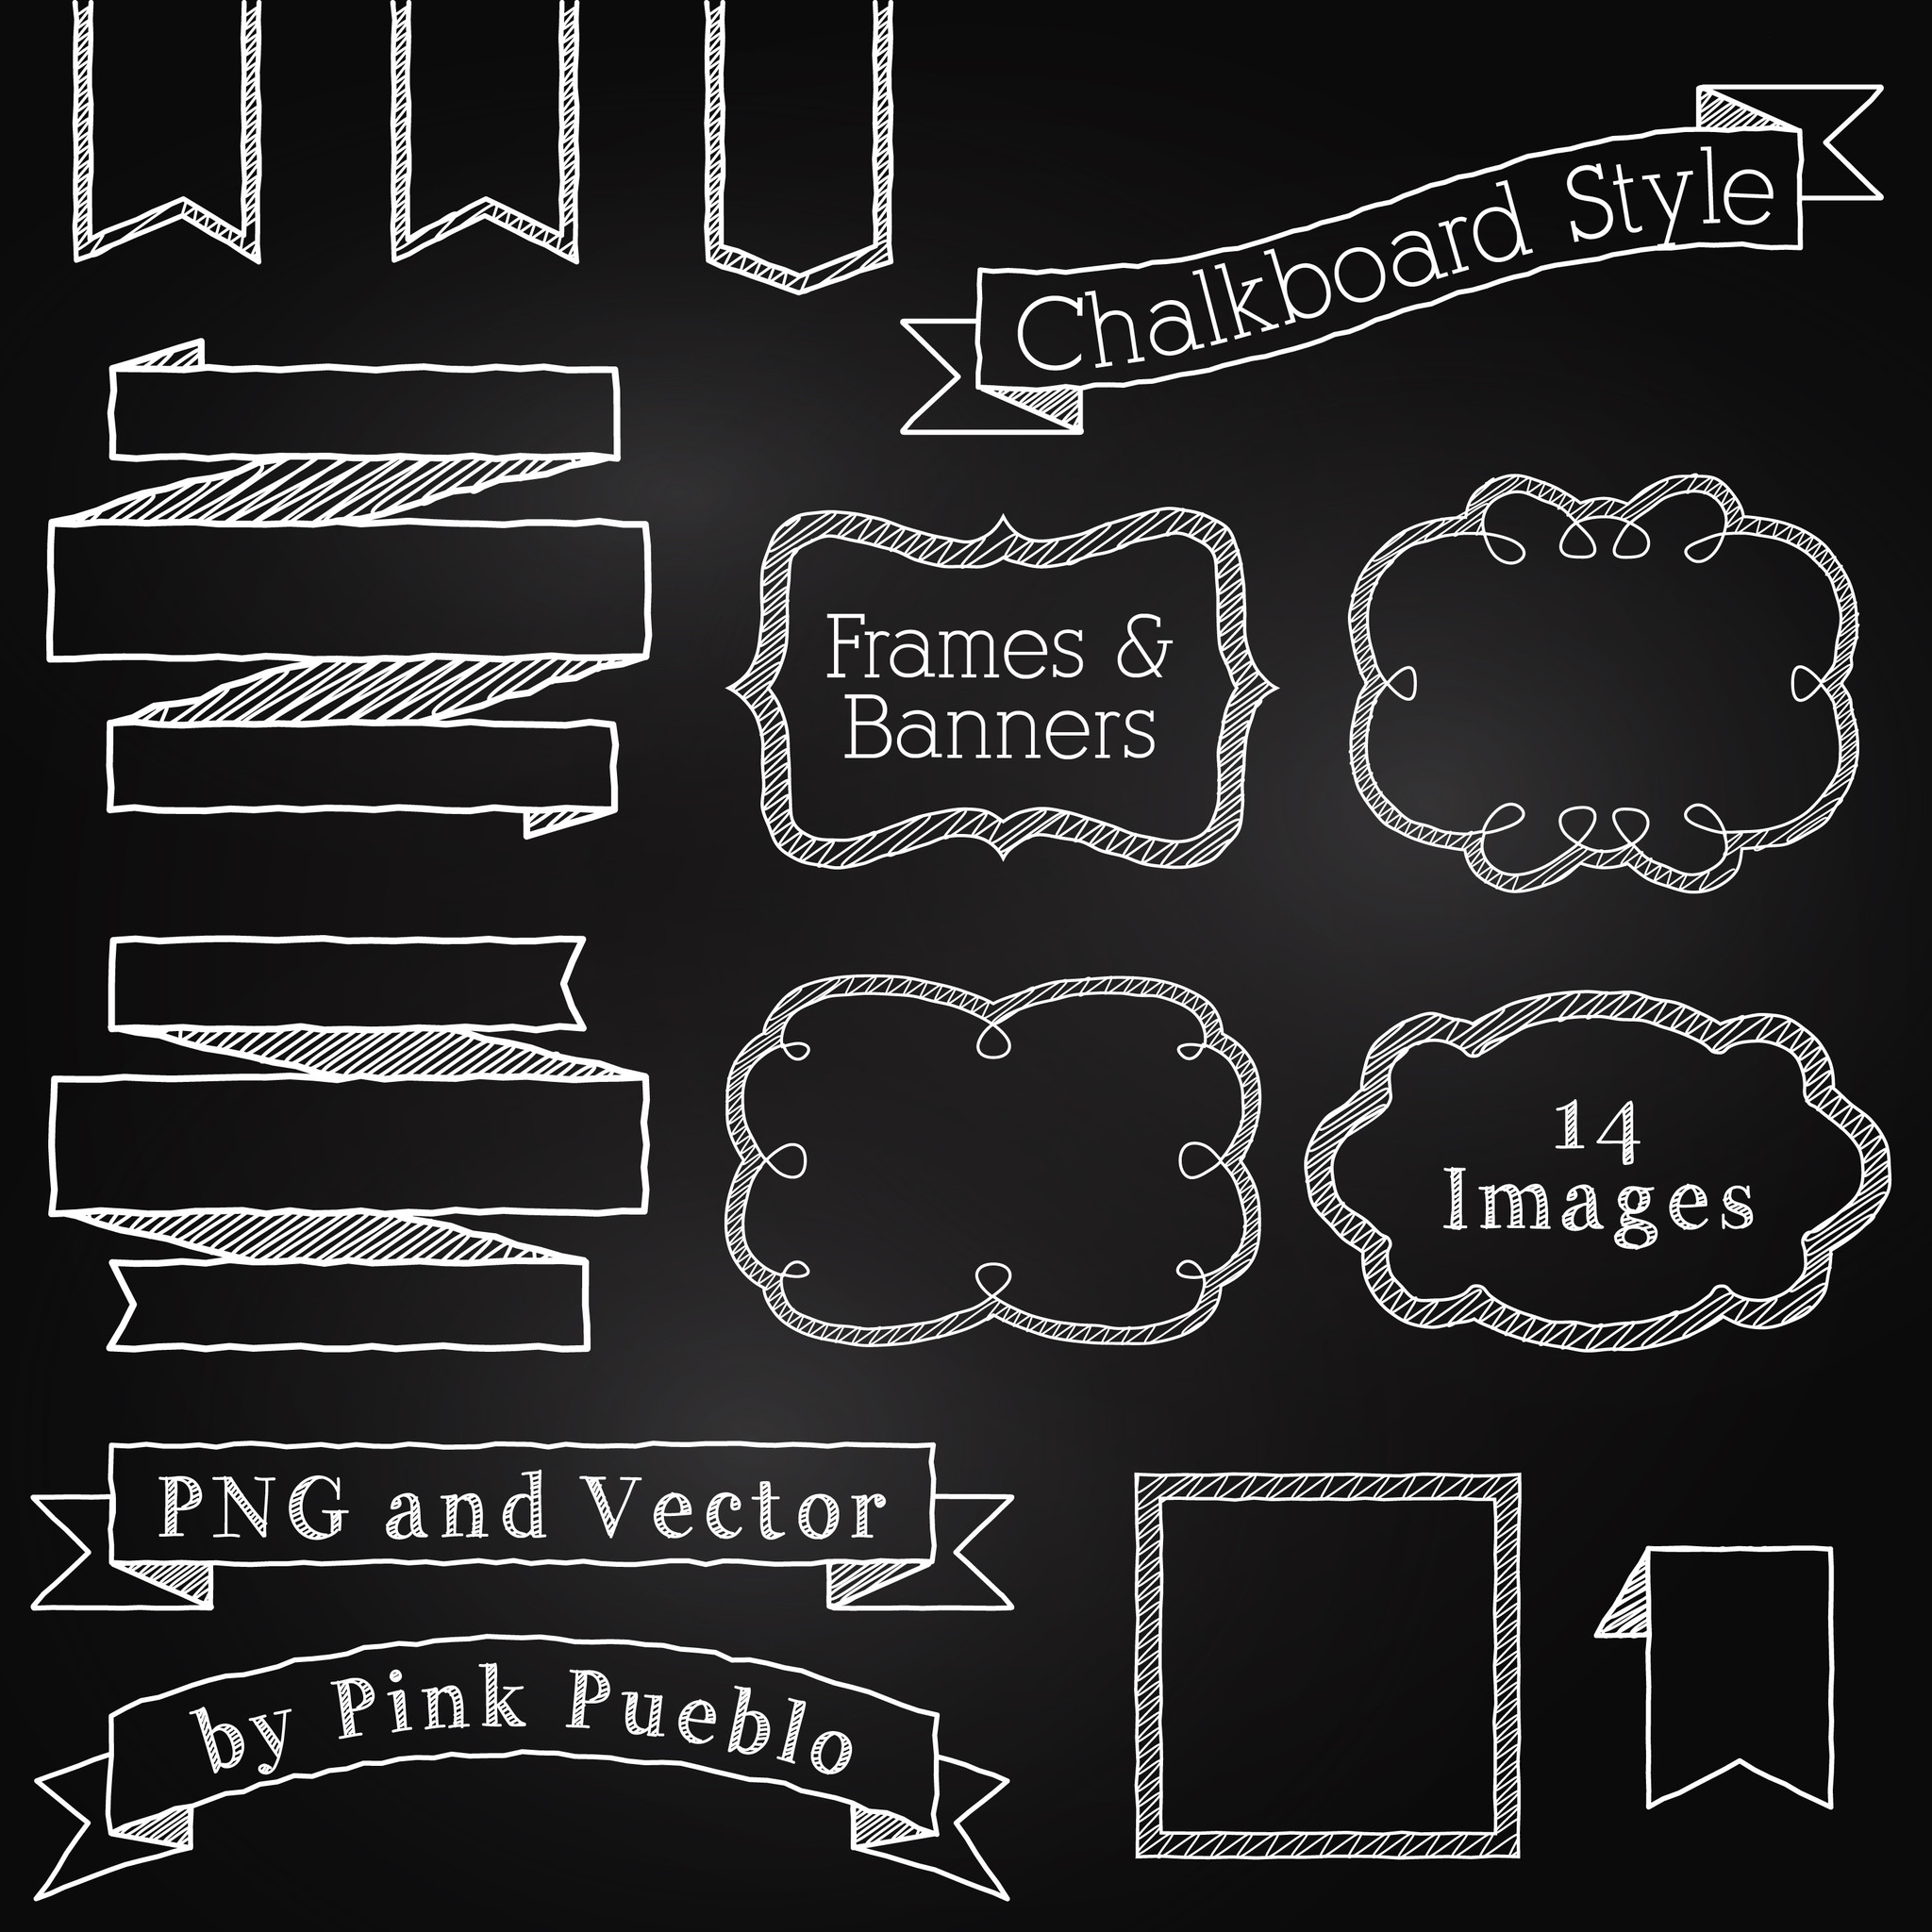 chalkboard clipart download free - photo #11